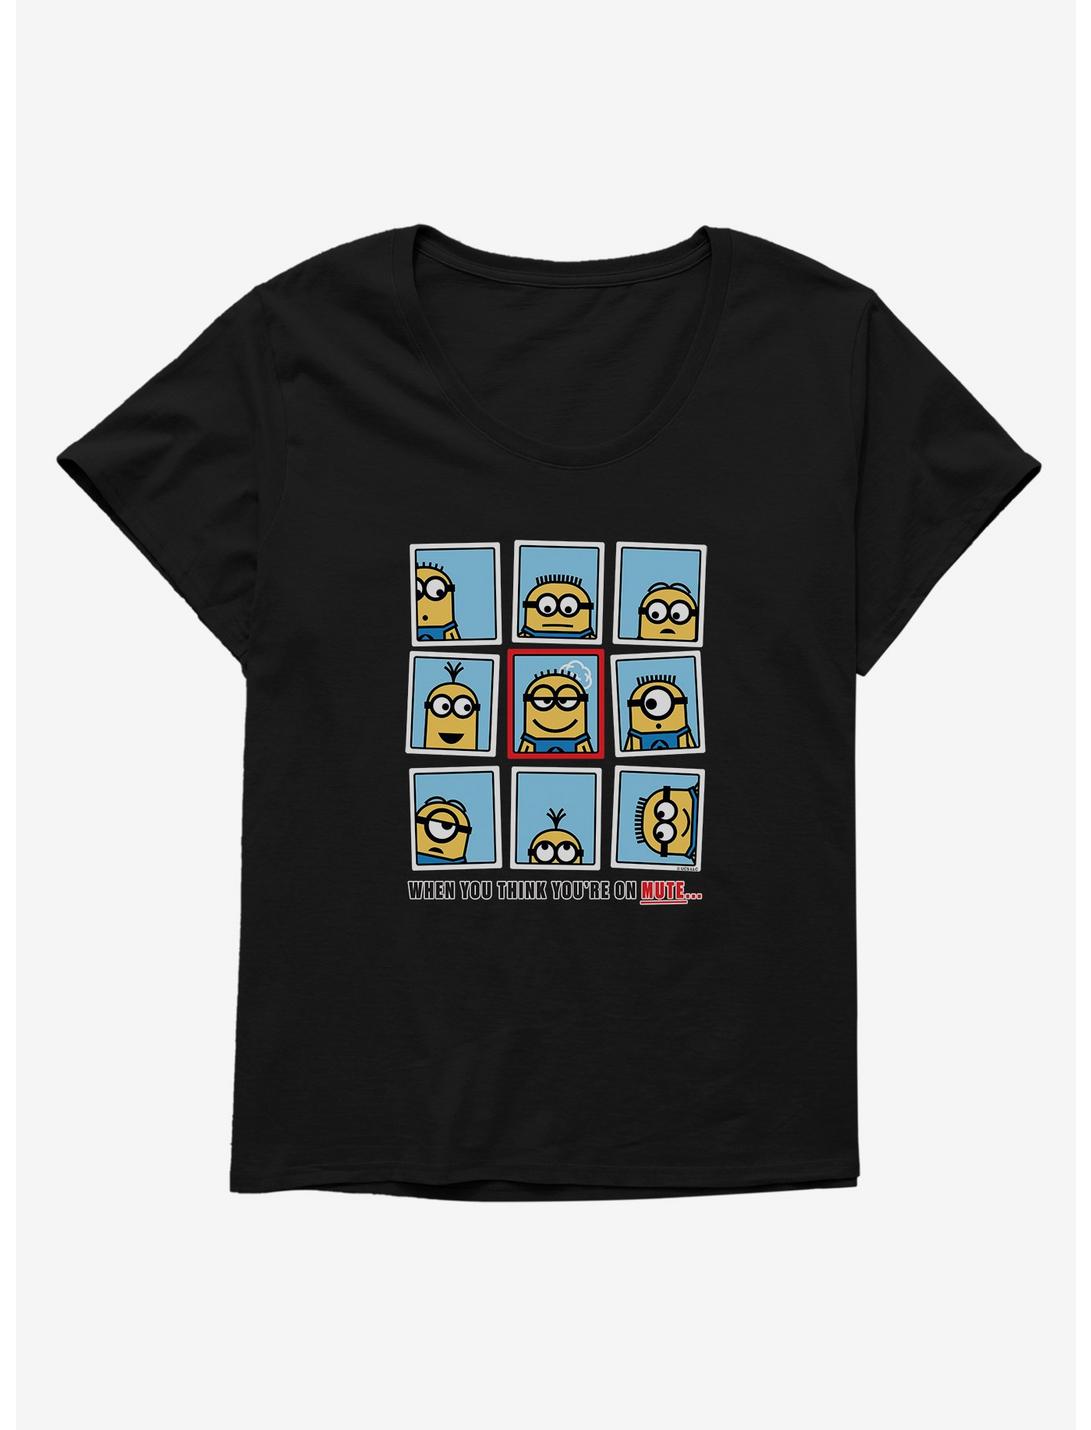 Minions When You Think You're On Mute Womens T-Shirt Plus Size, , hi-res